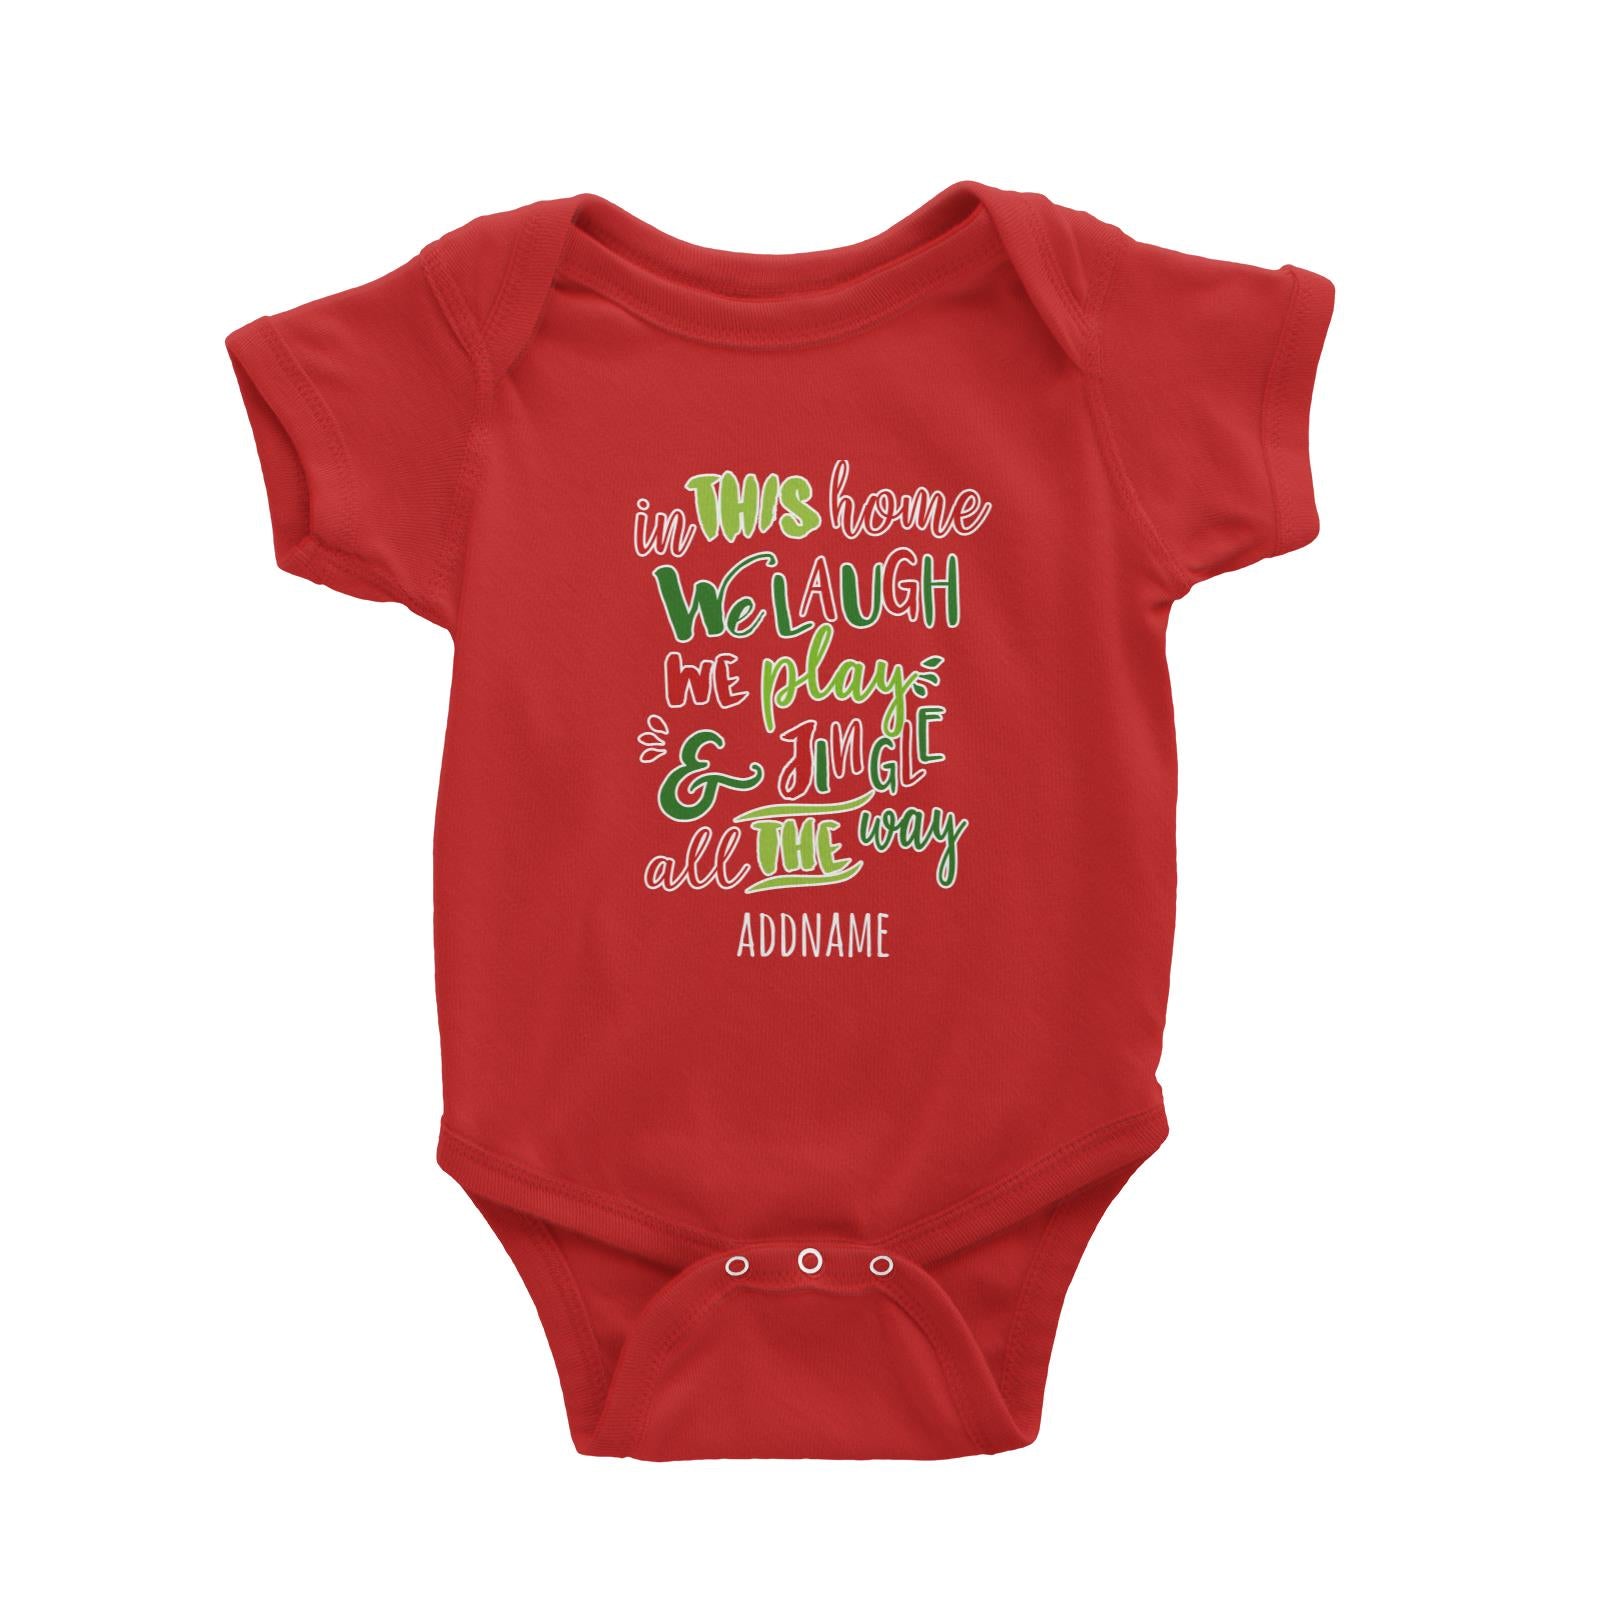 In This Home We Laugh, We Play & Jingle All The Way Lettering Addname Baby Romper Christmas Matching Family Personalizable